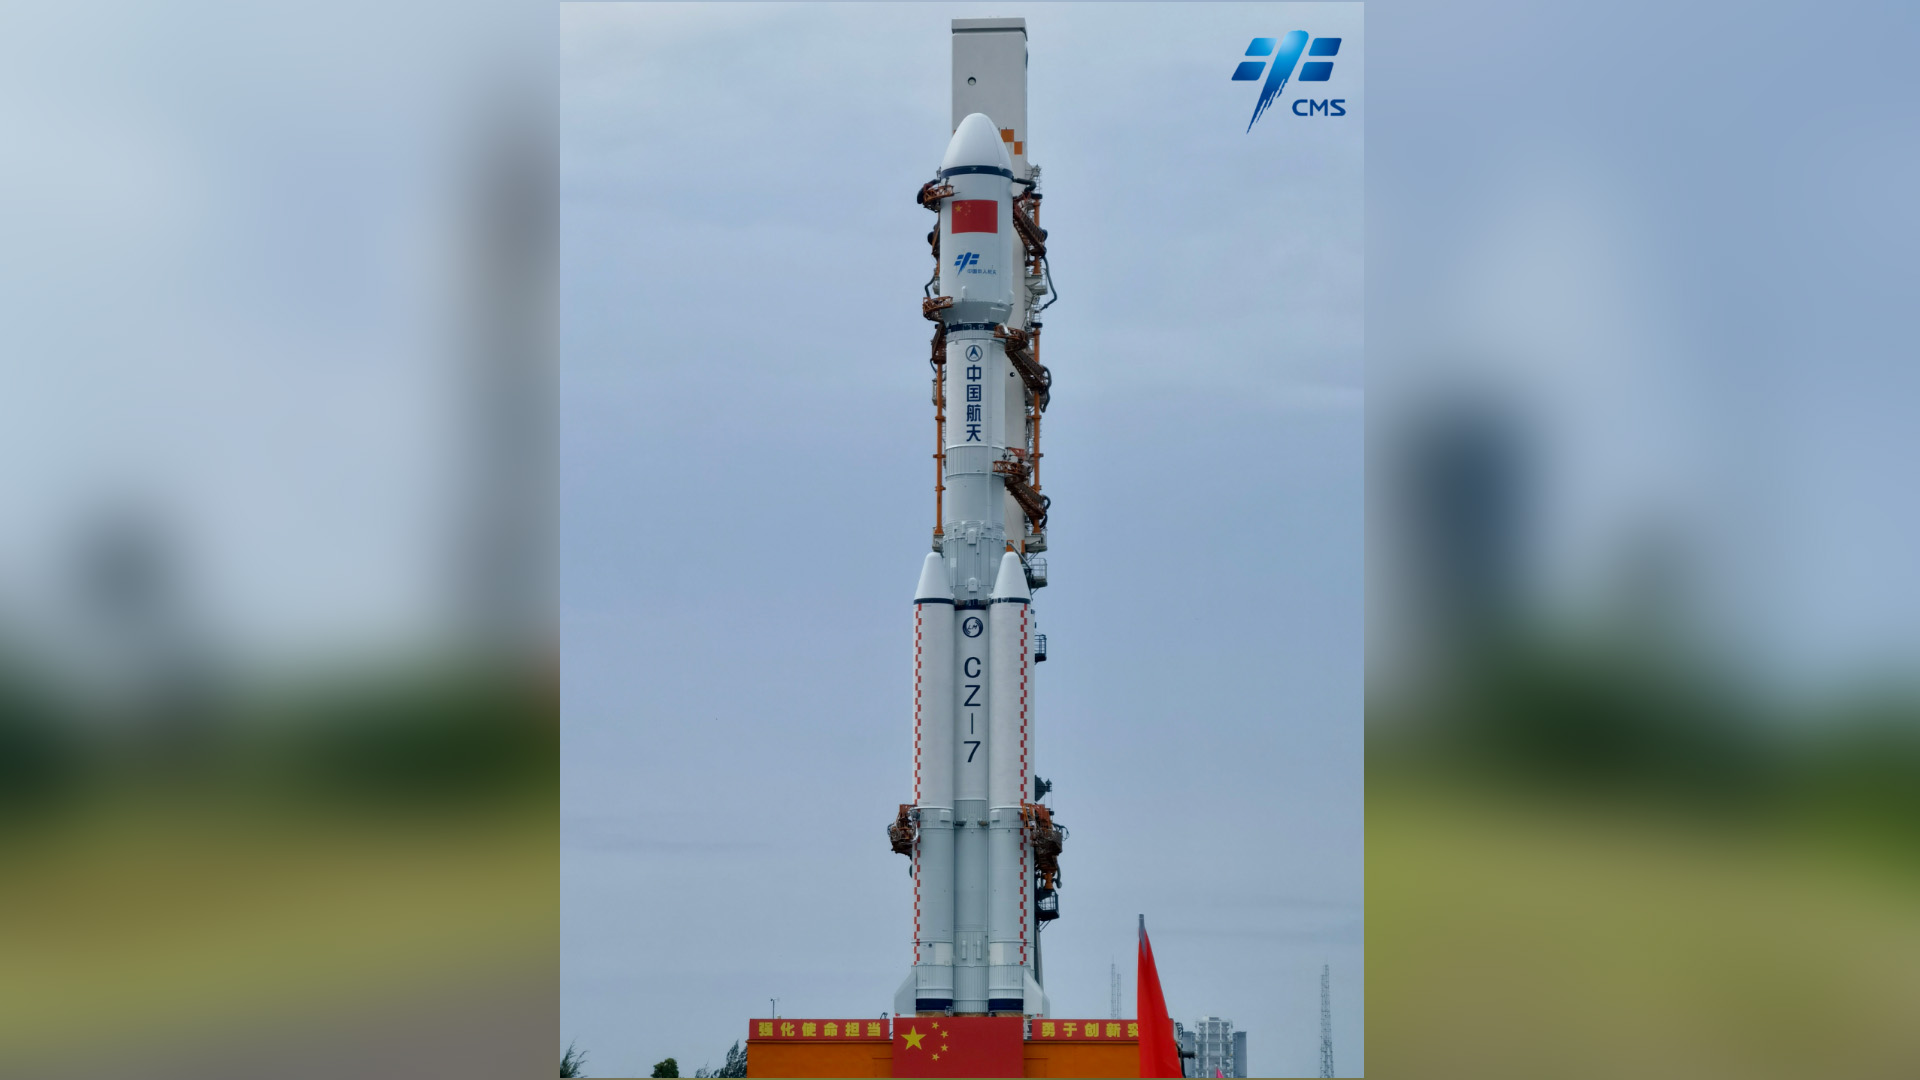 A Chinese Long March 7 rocket carrying the Tianzhou 4 cargo ship rolls out to its pad at the Wenchang Space Launch Site on Hainan Island in southern China on May 7, 2022 ahead of a planned launch.